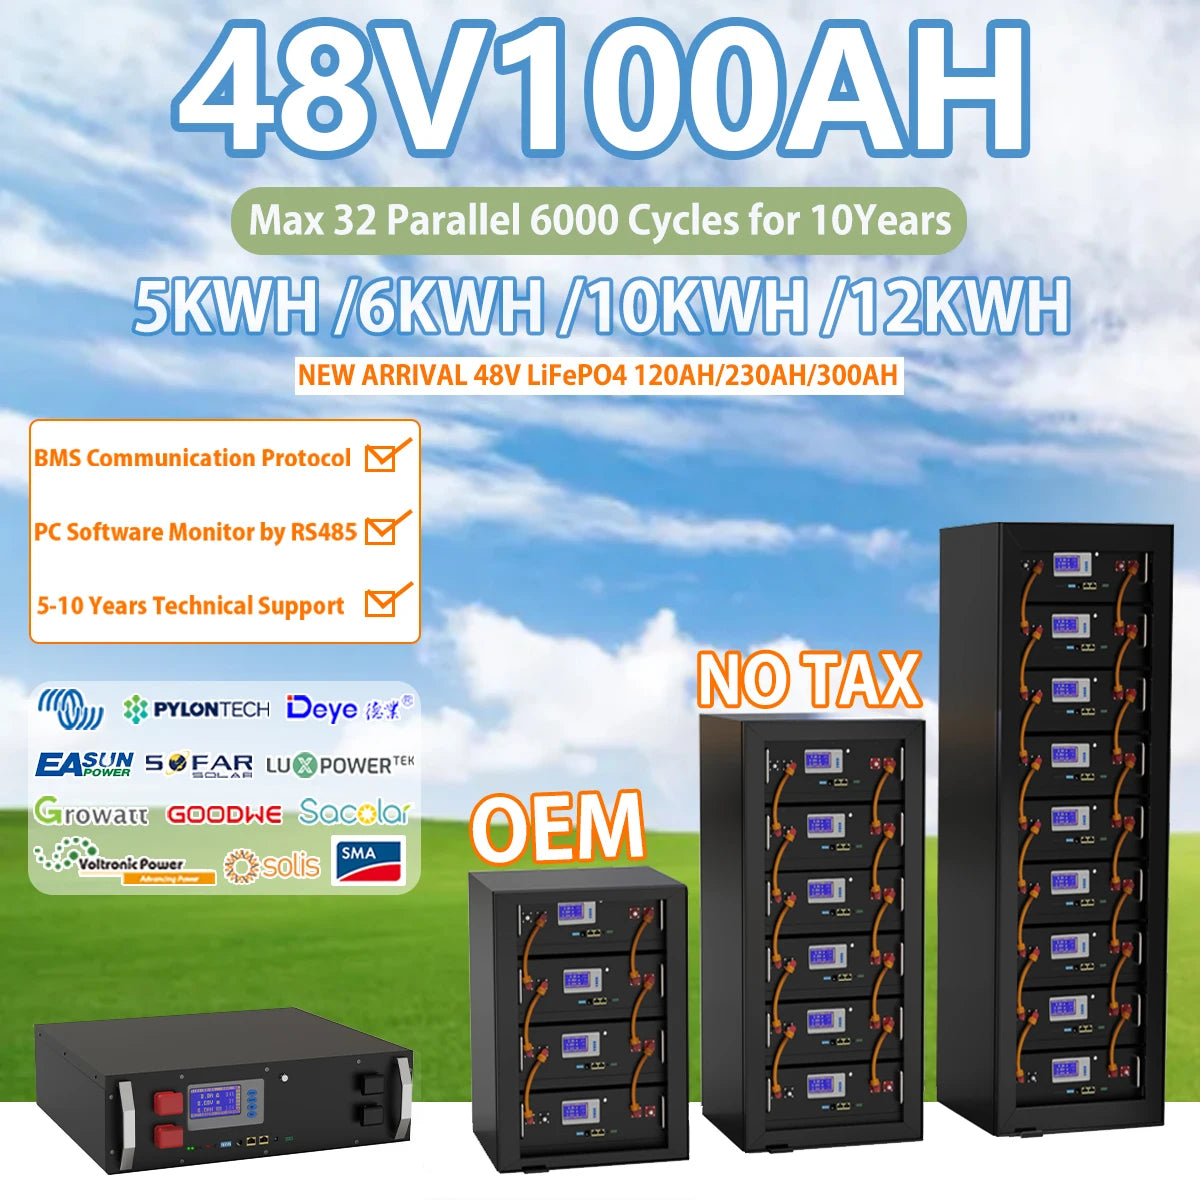 48V 100Ah 120Ah LiFePO4 Battery, High-performance 48V LiFePO4 battery with 100Ah/120Ah capacity, reliable solution for parallel connection.